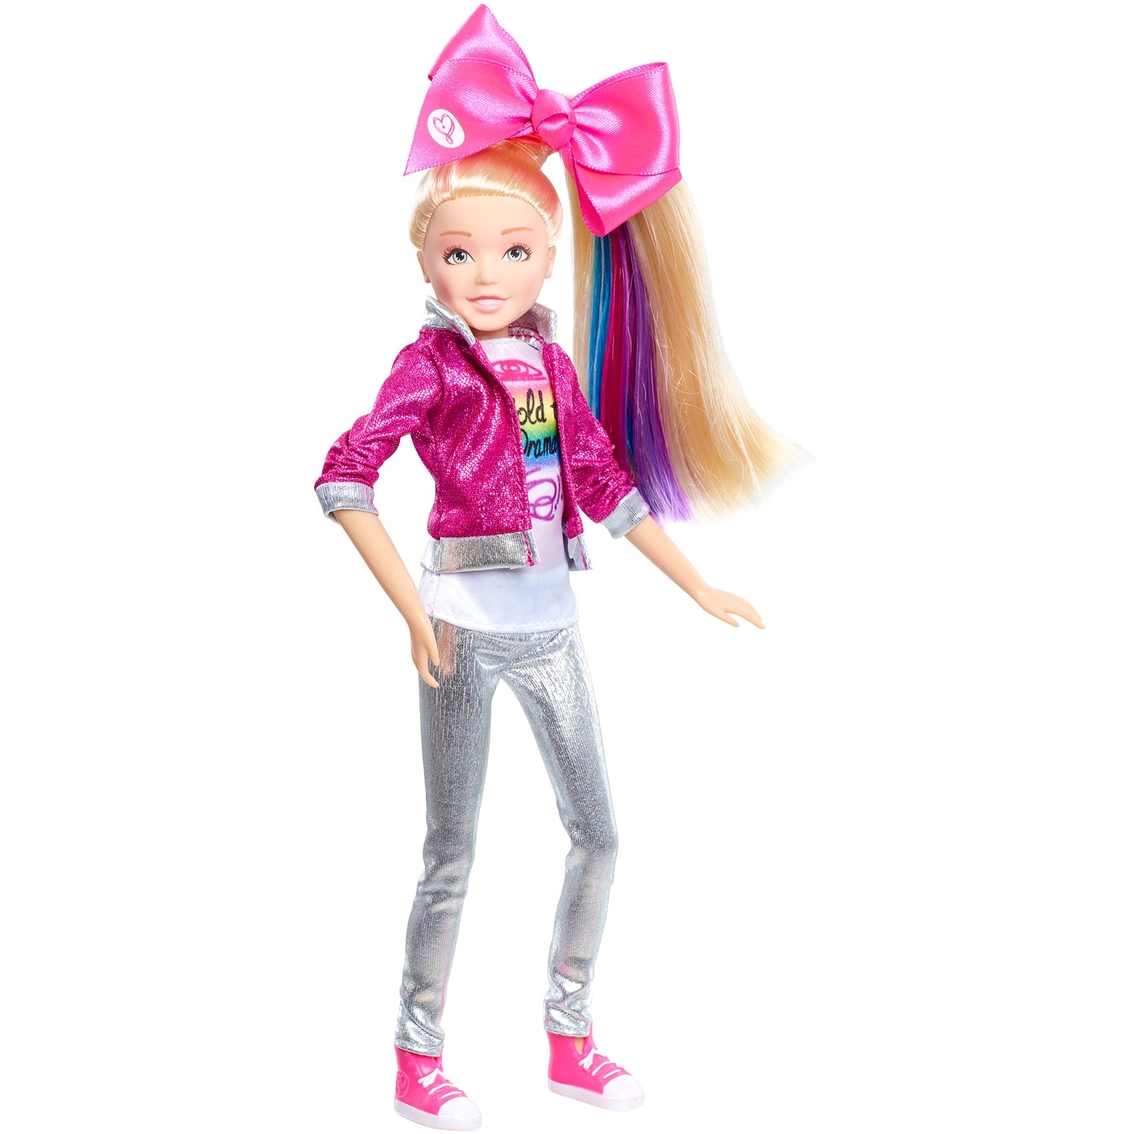 Just Play JoJo Siwa 10-inch Singing Doll for sale online